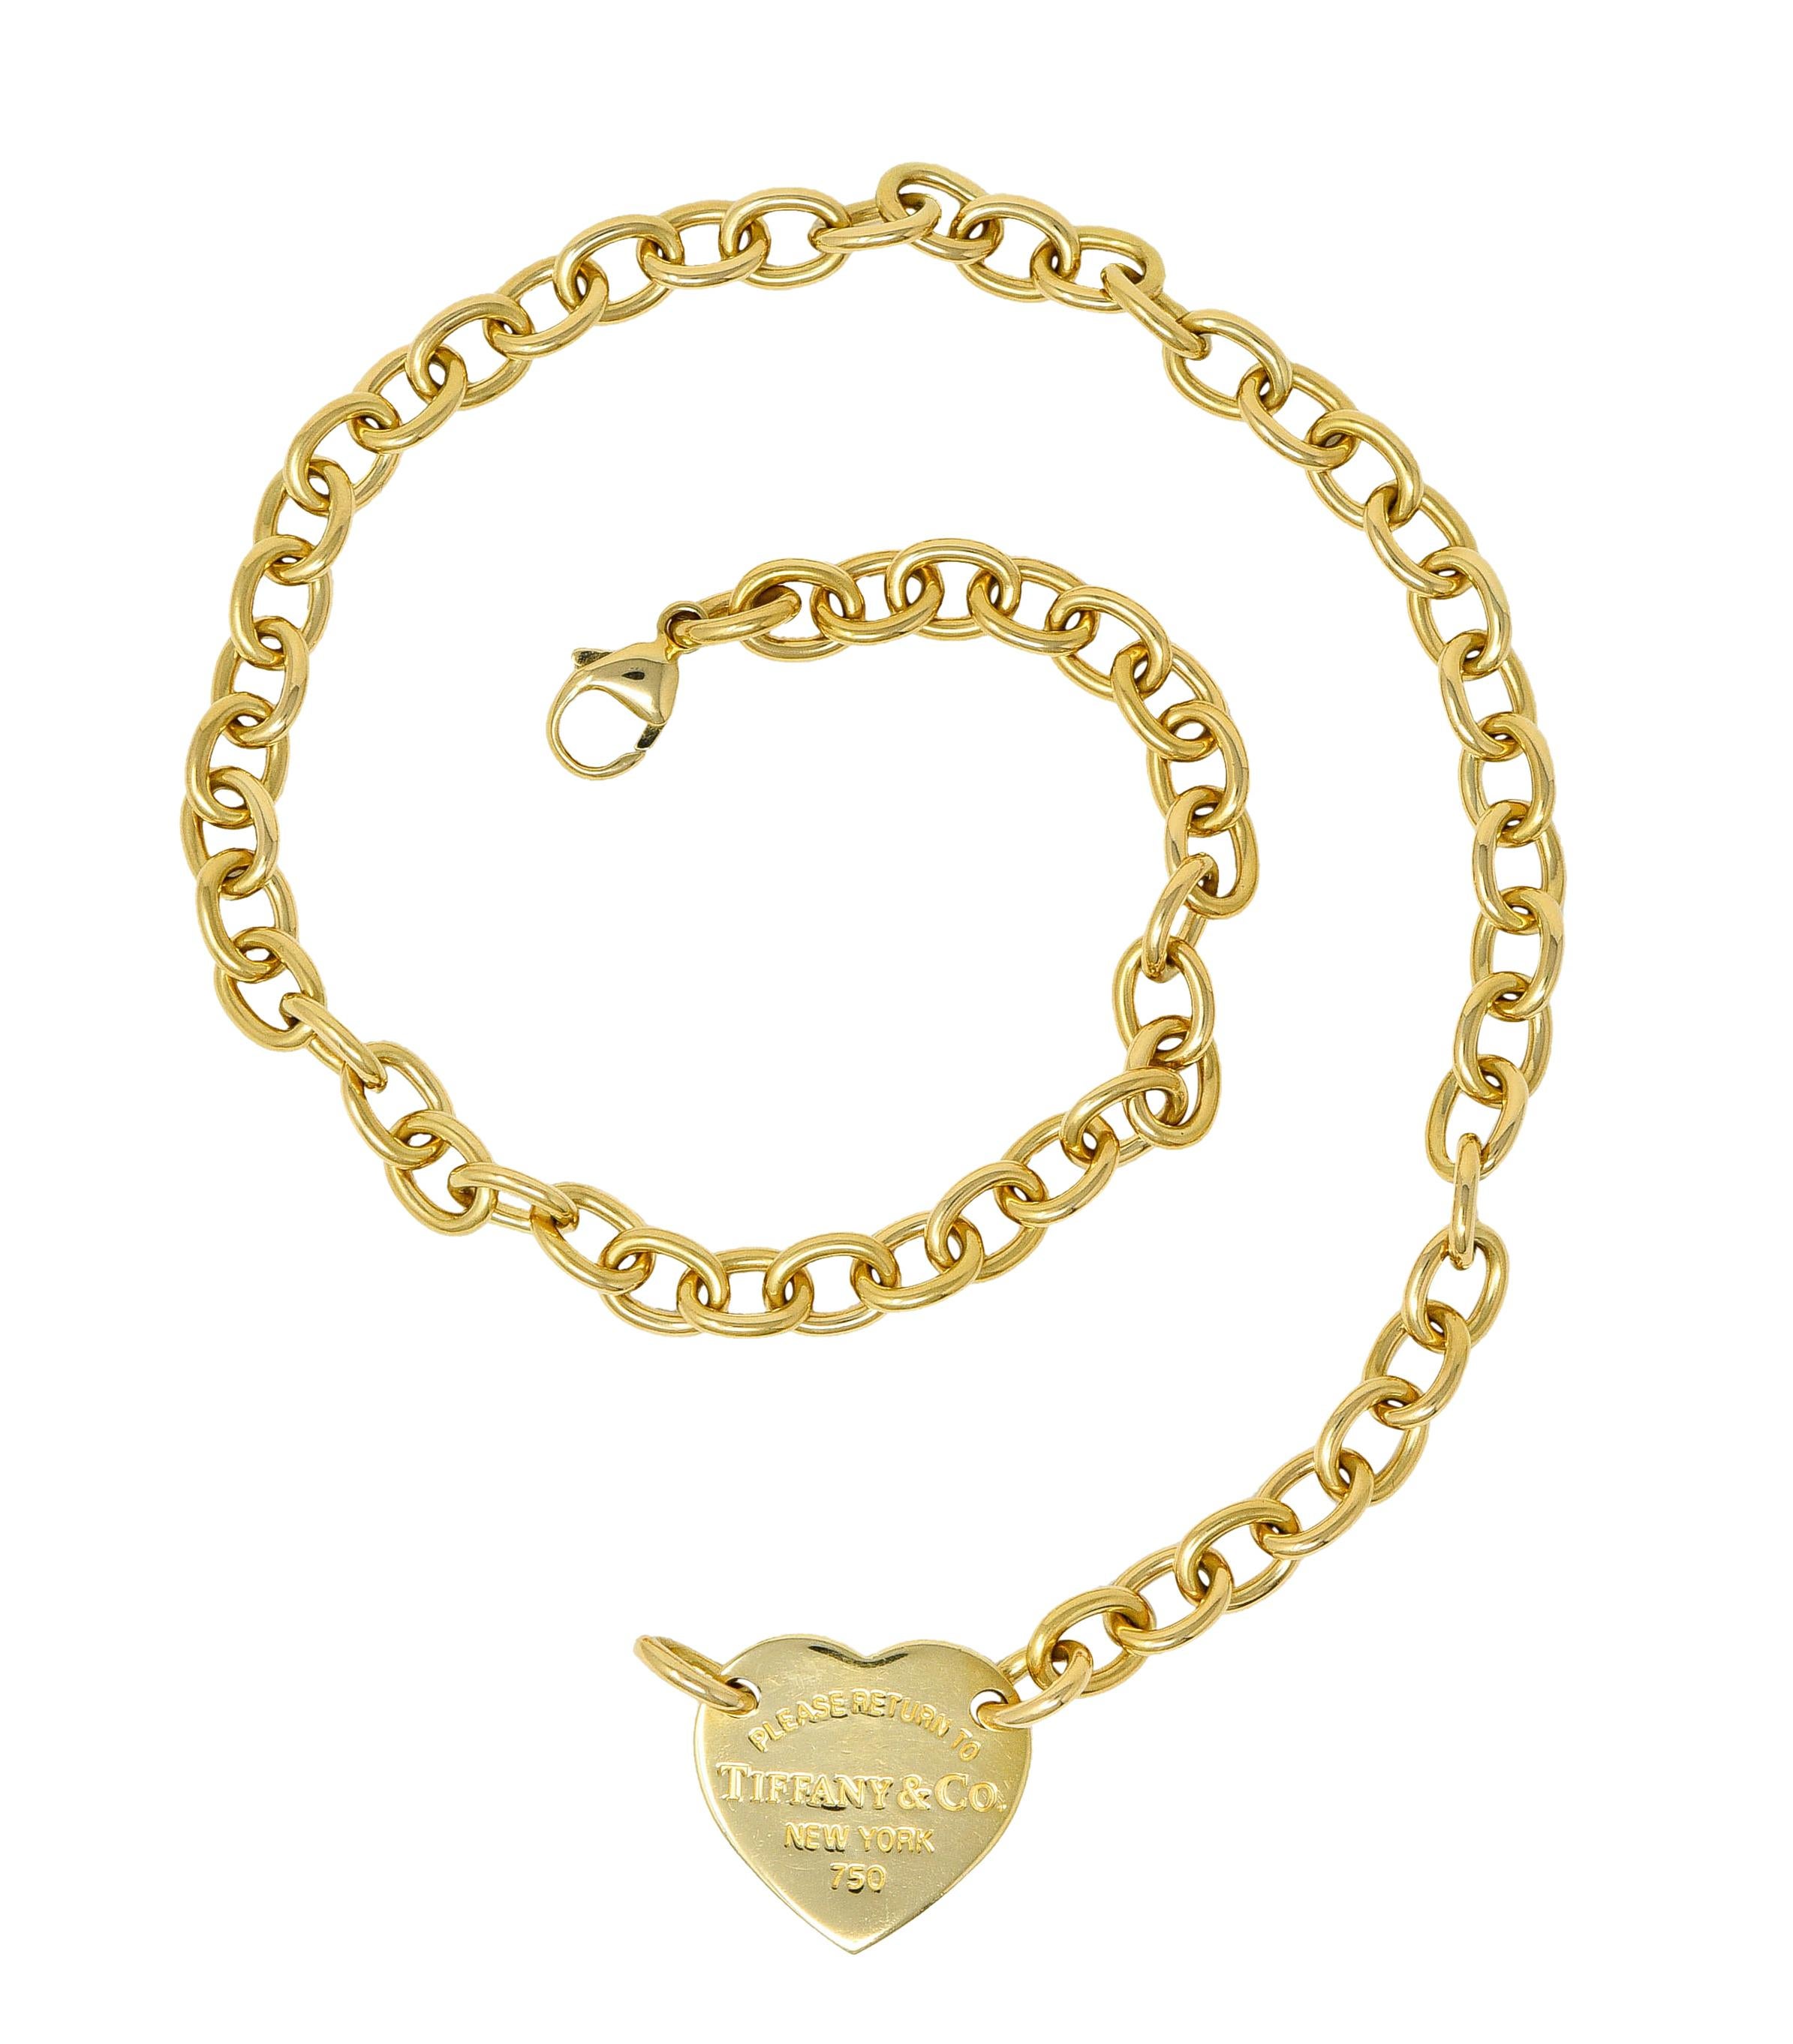 Collar style necklace is comprised of brightly polished oval links

Centering the classic 'Please Return to Tiffany & Co.' heart

Completed by a lobster clasp

Stamped 750 for 18 karat gold

Fully signed Tiffany & Co.

Circa: 1990s

Length: 15 3/8